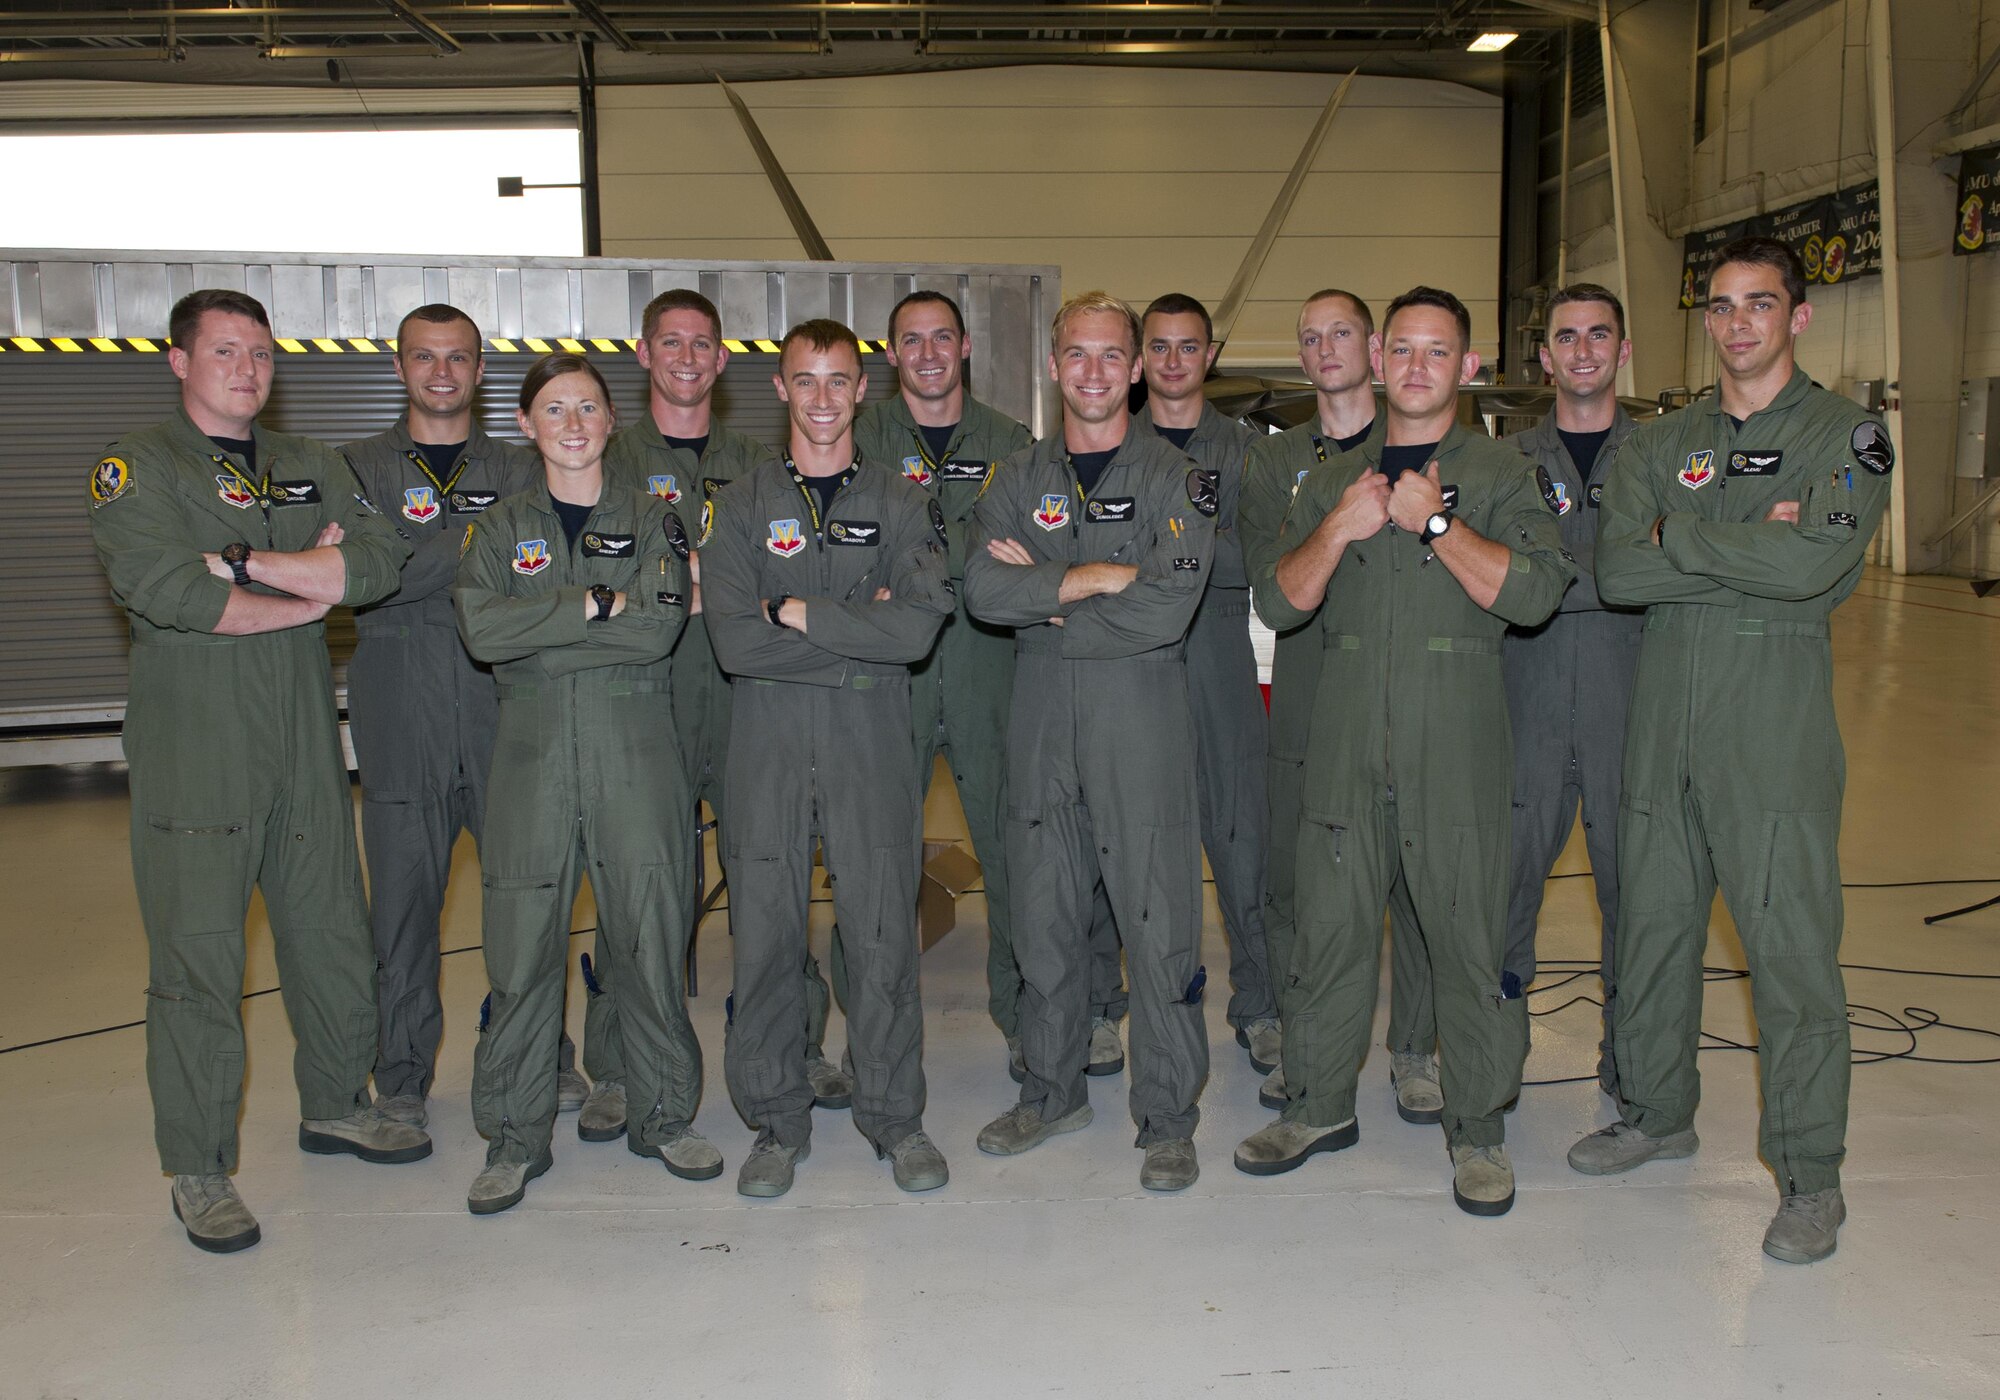 Tyndall’s F-22 Raptor Basic Course graduating class 16-ABR gathers in Hangar 5 after their graduation Aug. 19, 2016. Twelve students completed the seven-month-long course, making it the largest F-22 B-Course class in history. (U.S. Air Force photo by Staff Sgt. Alex Fox Echols III)